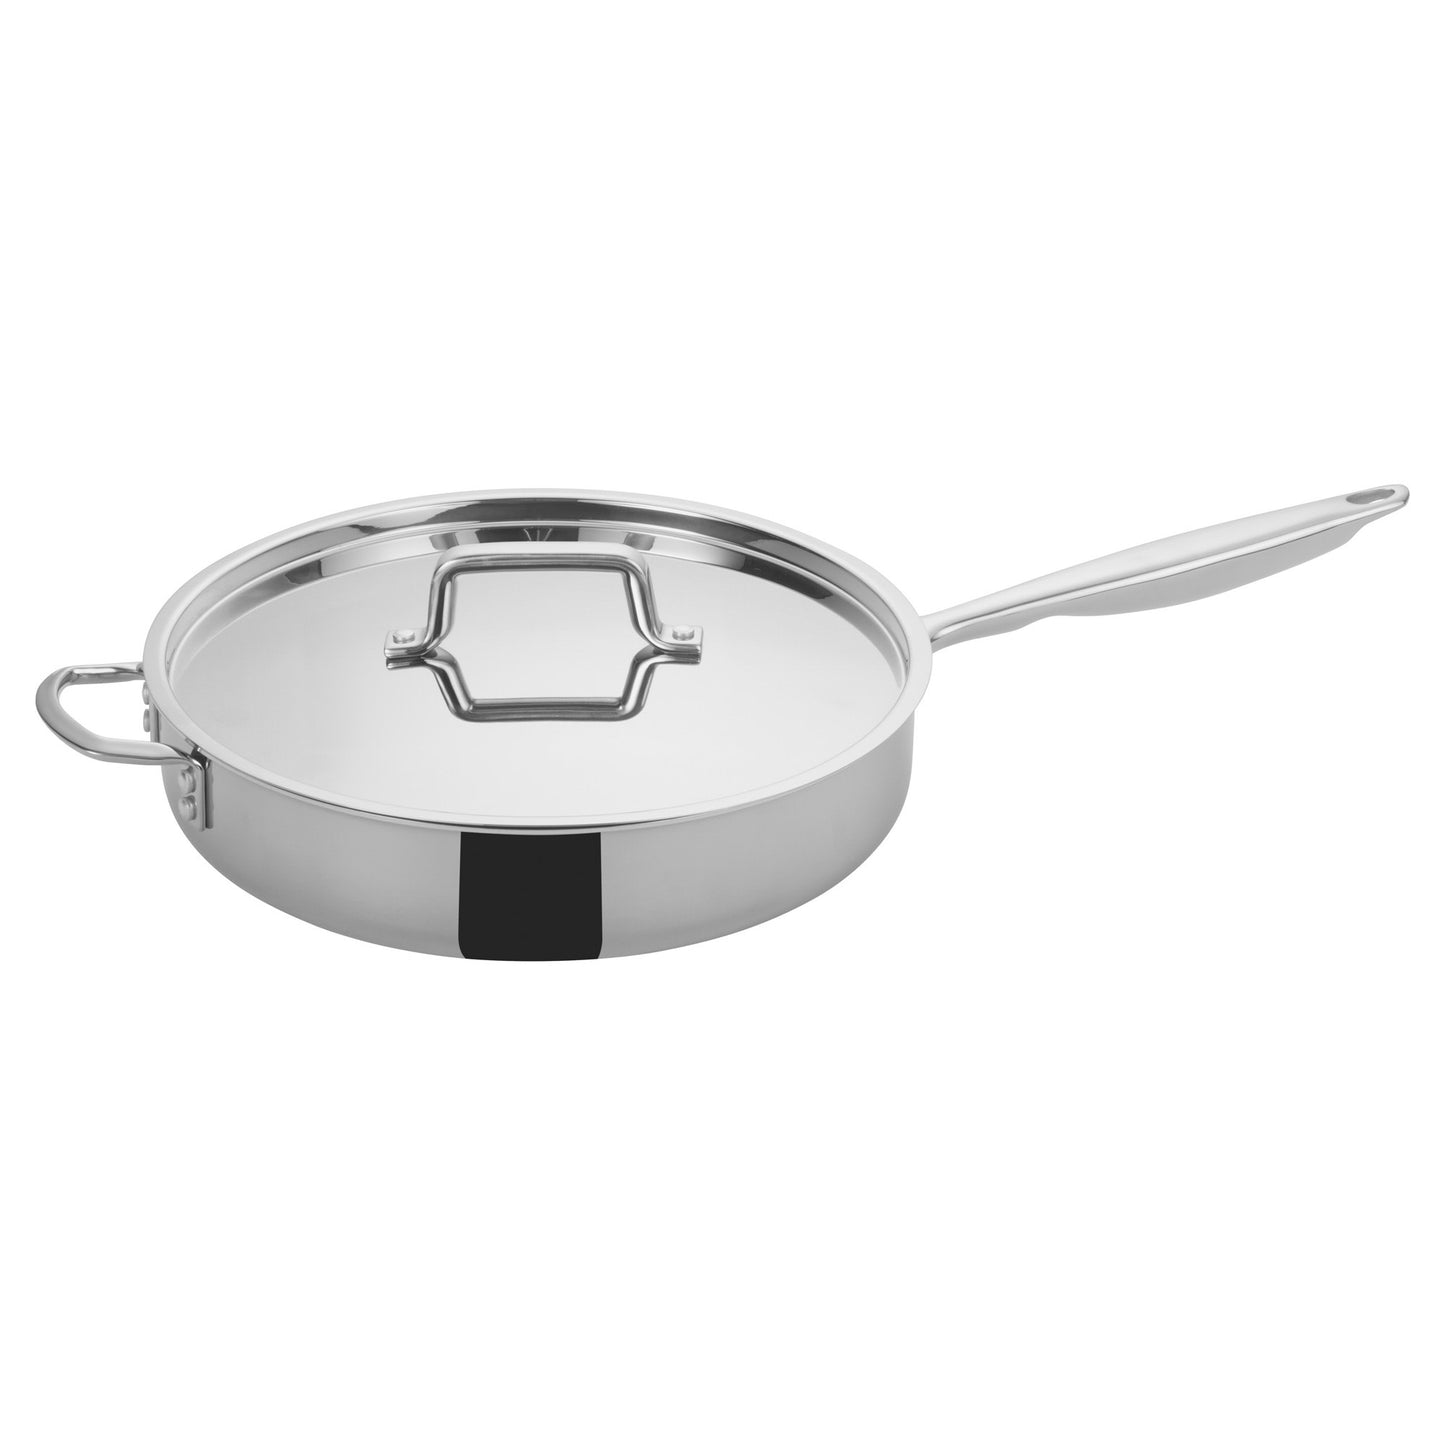 TGET-6 - Tri-Gen Tri-Ply Stainless Steel Sauté Pan with Cover - 6 Quart